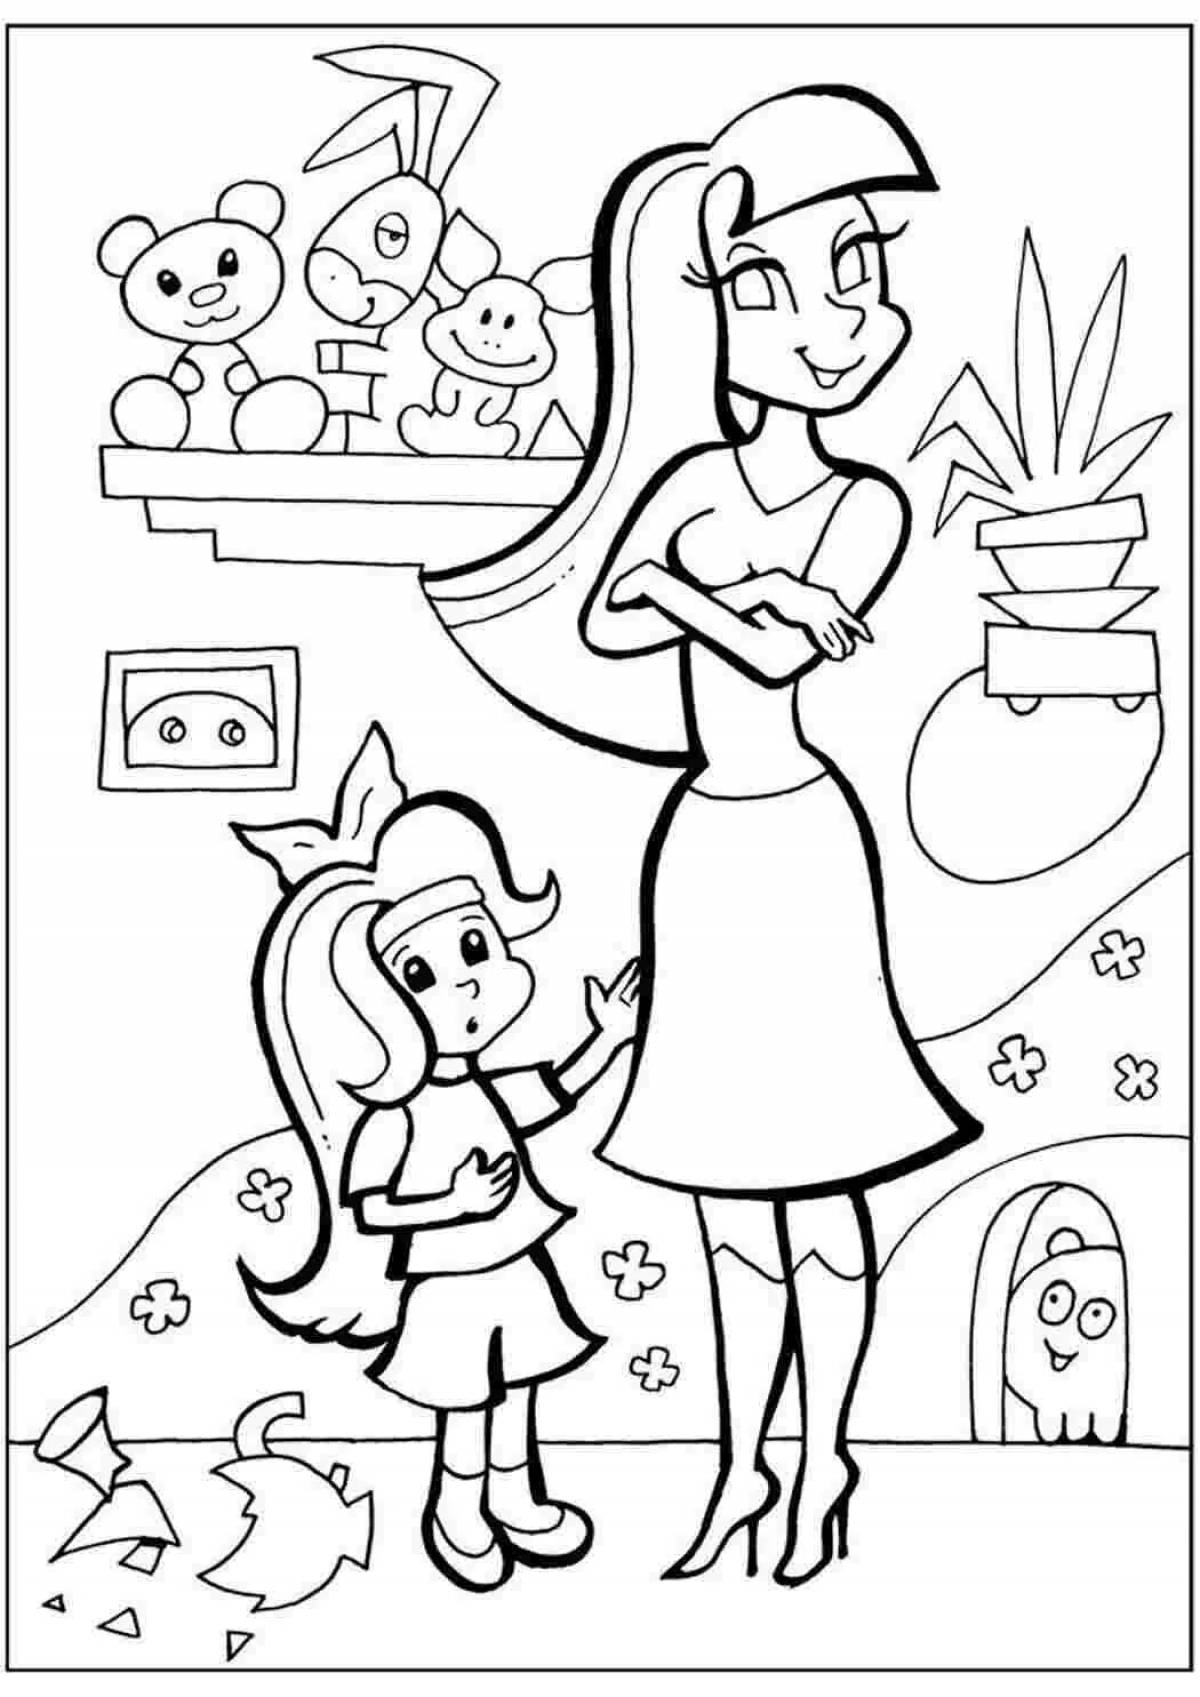 Terrific daughter coloring page